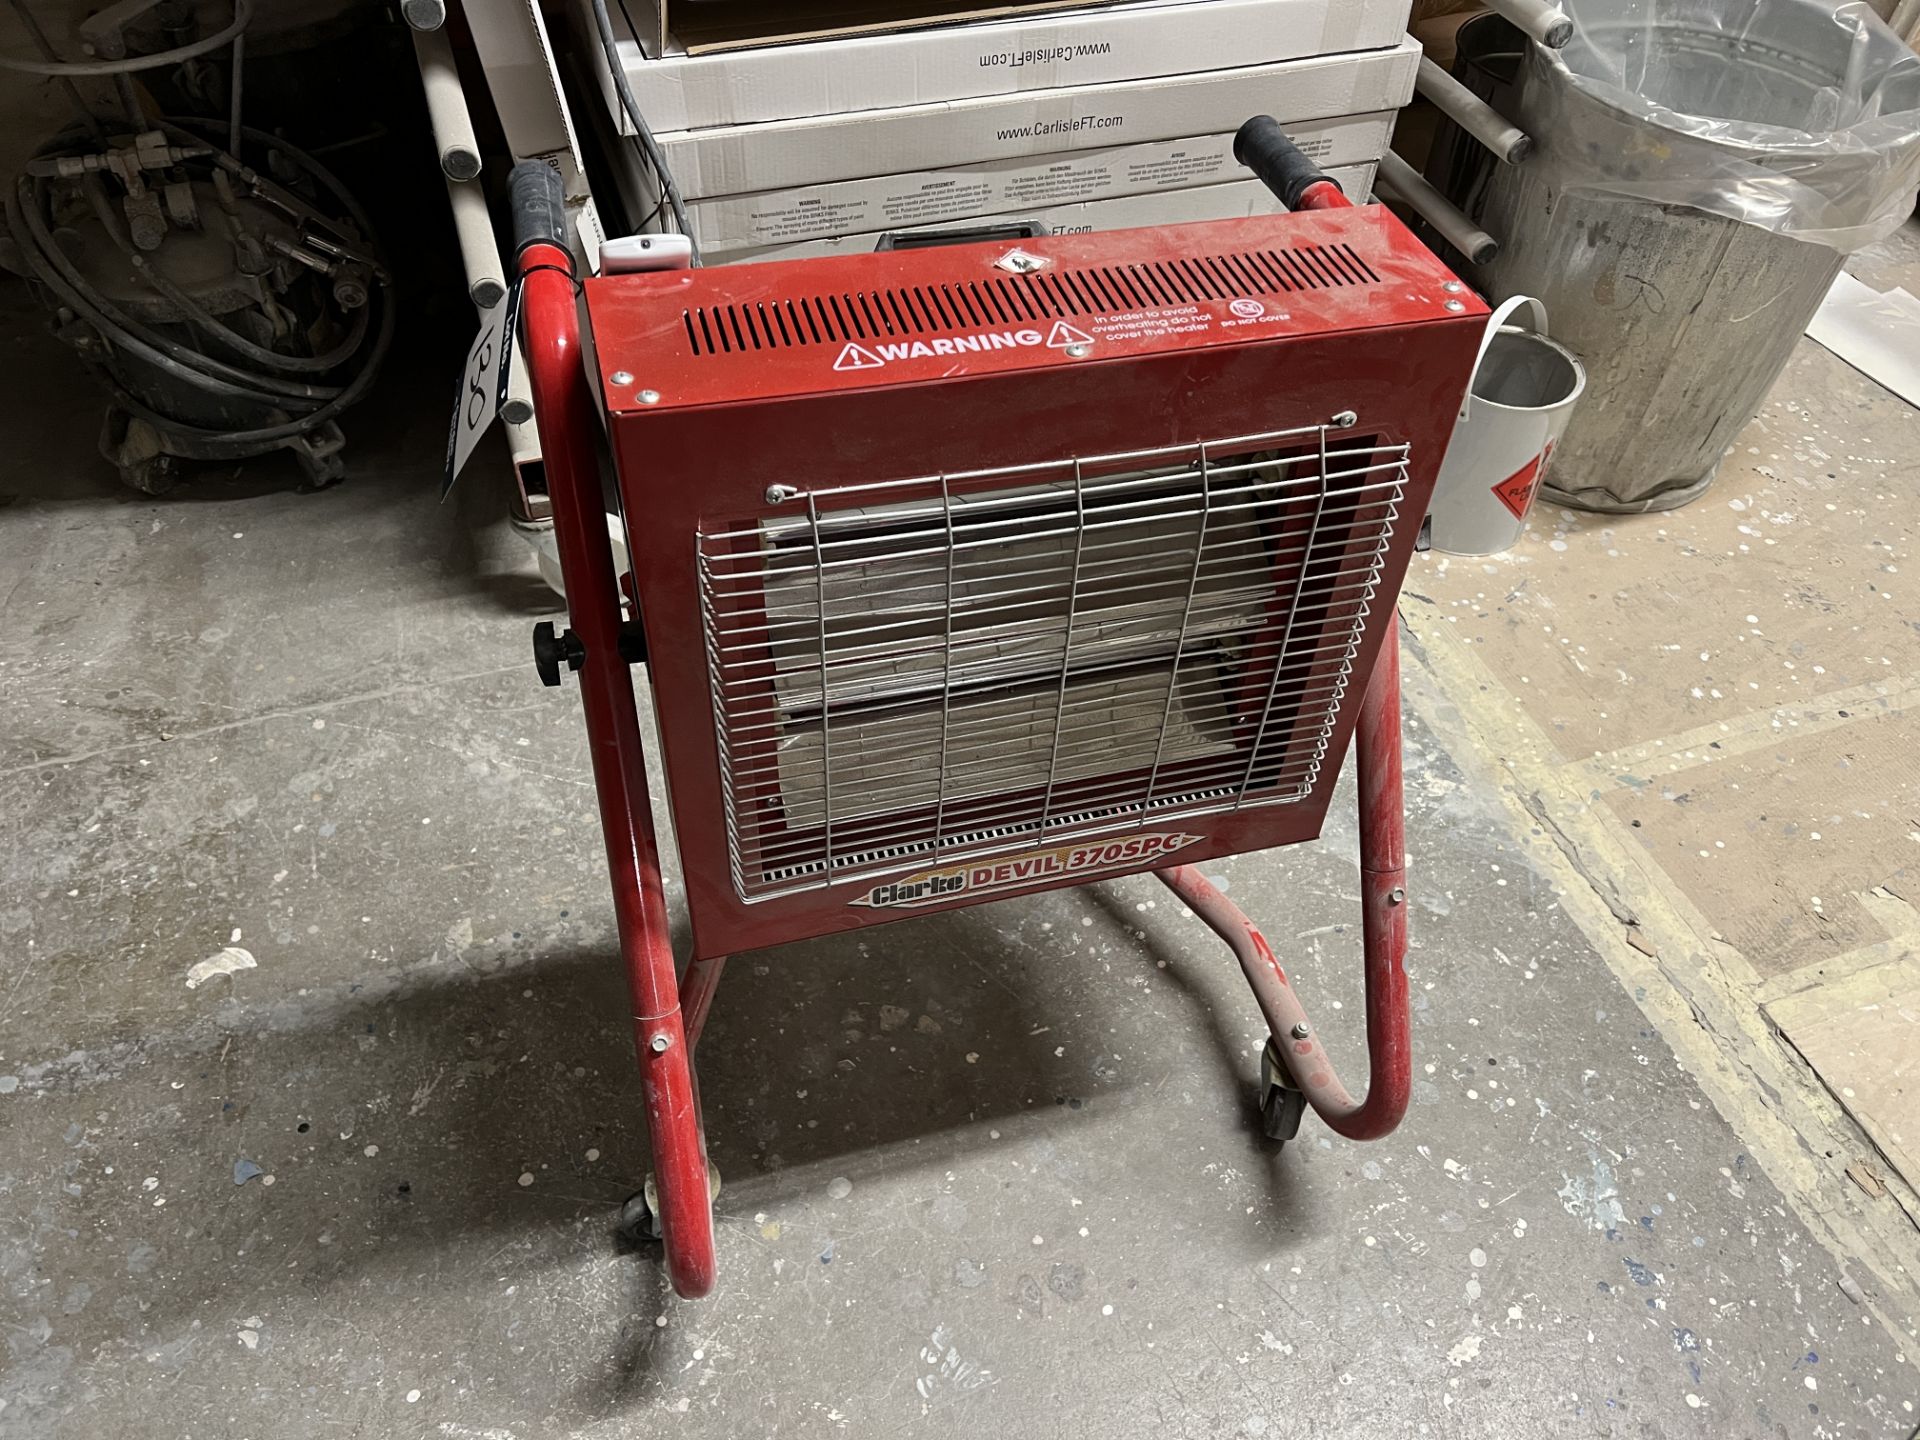 Clark Devil 370SPC Inferred heater with remote control, 230 volts, 2.8 Kw, DOM 2019, location